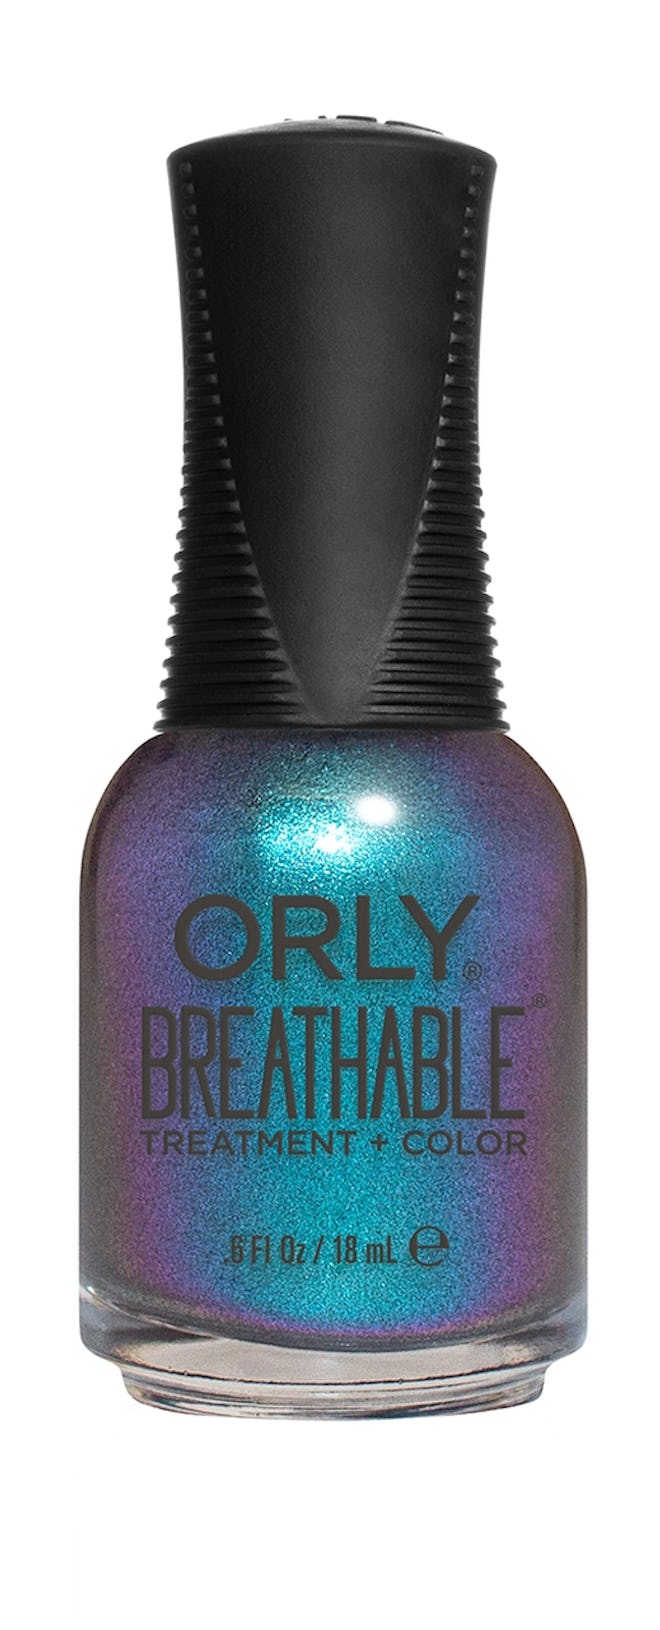 drugstore nail polish: ORLY Breathable Treatment + Color in Freudian Flip